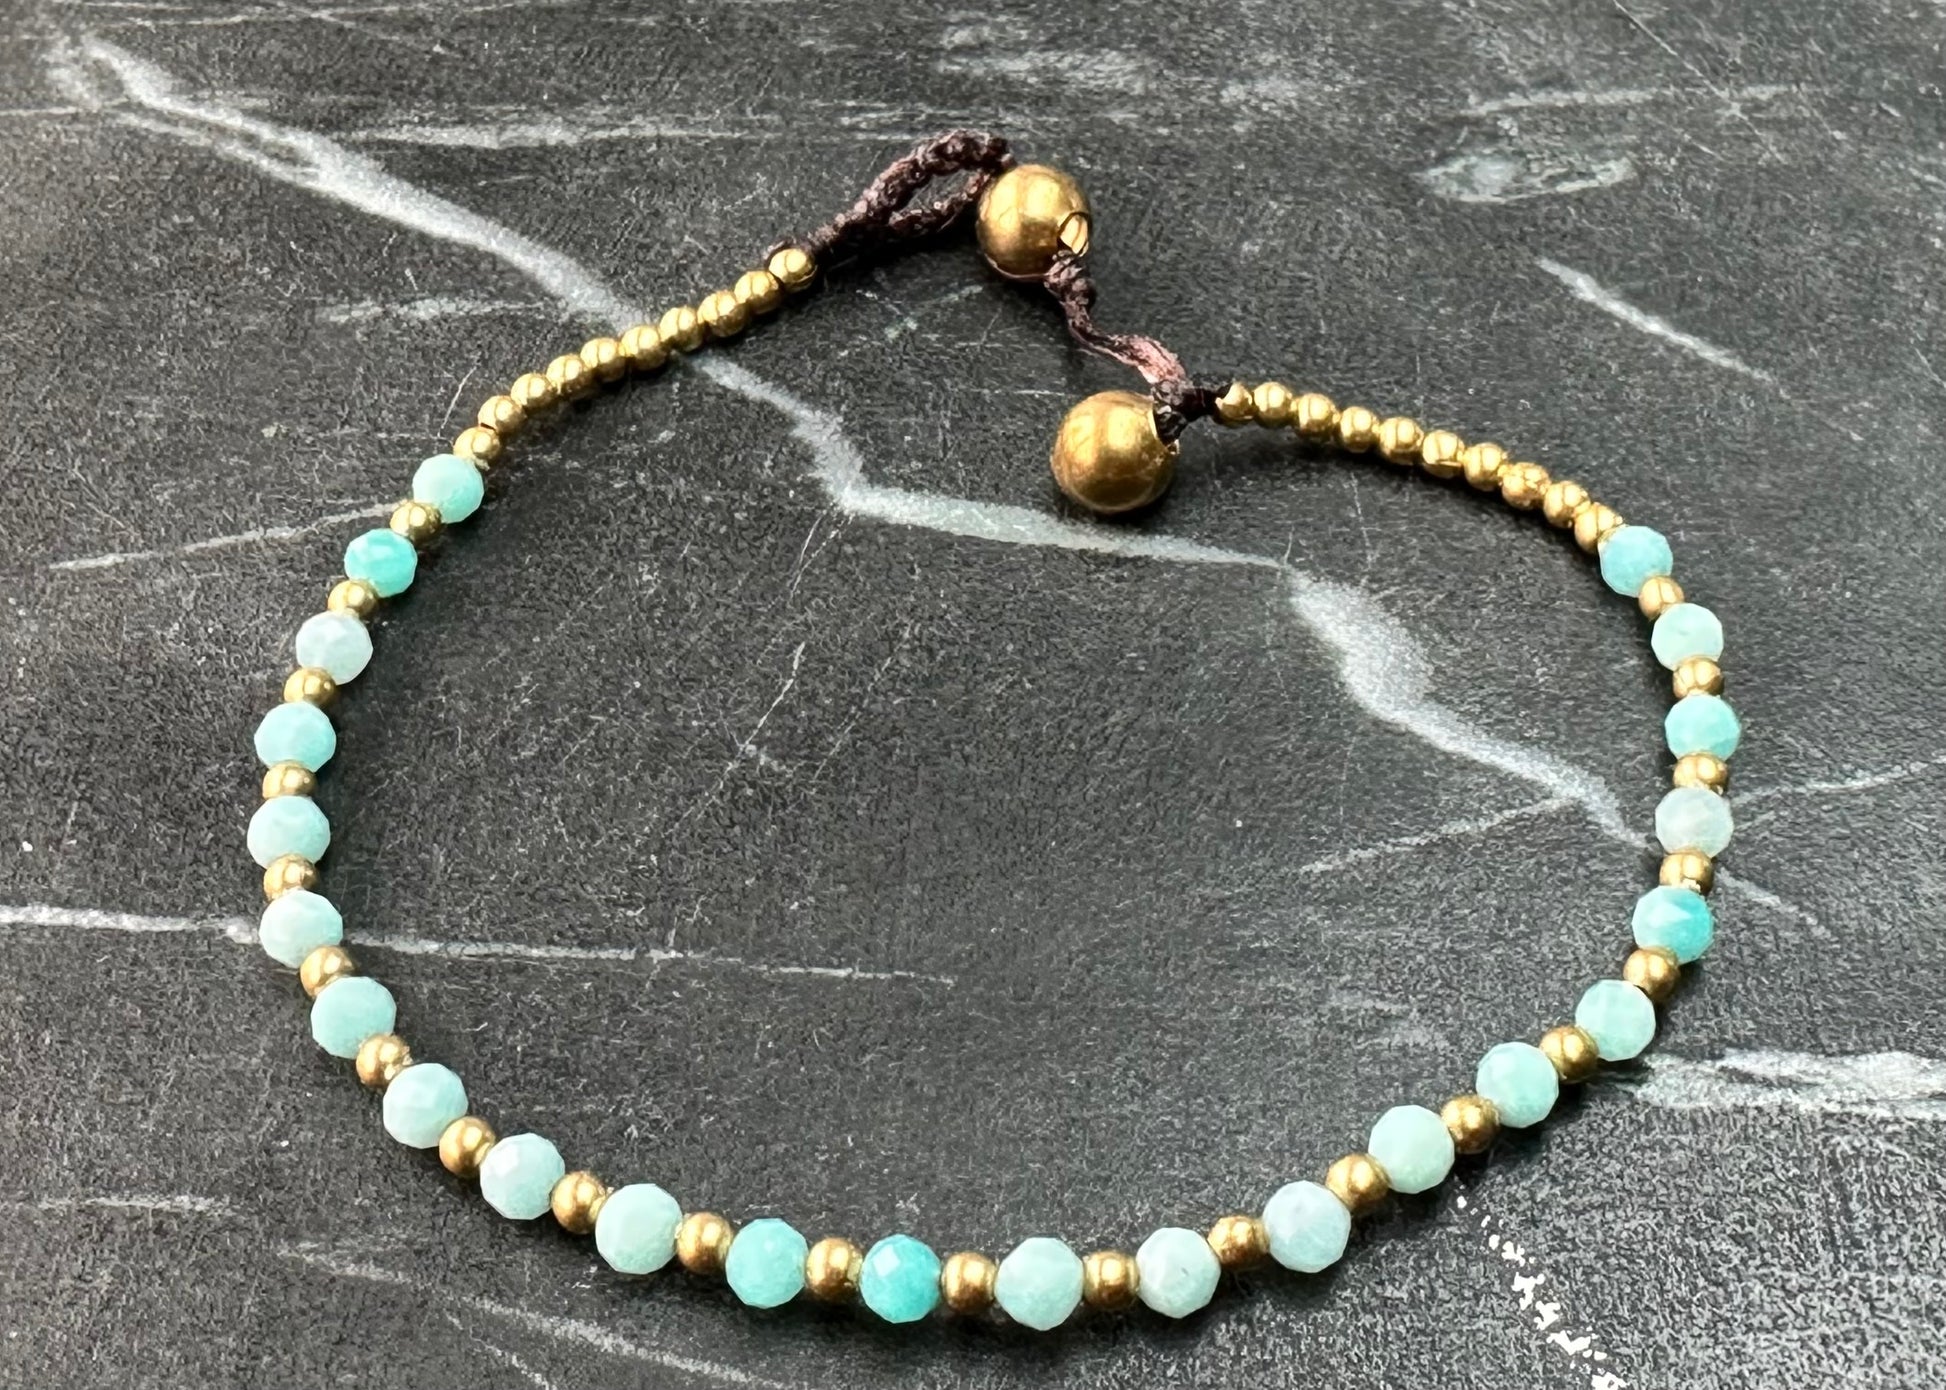 a crystal healing bracelet made of faceted Amazonite crystals on a cotton cord with brass beads